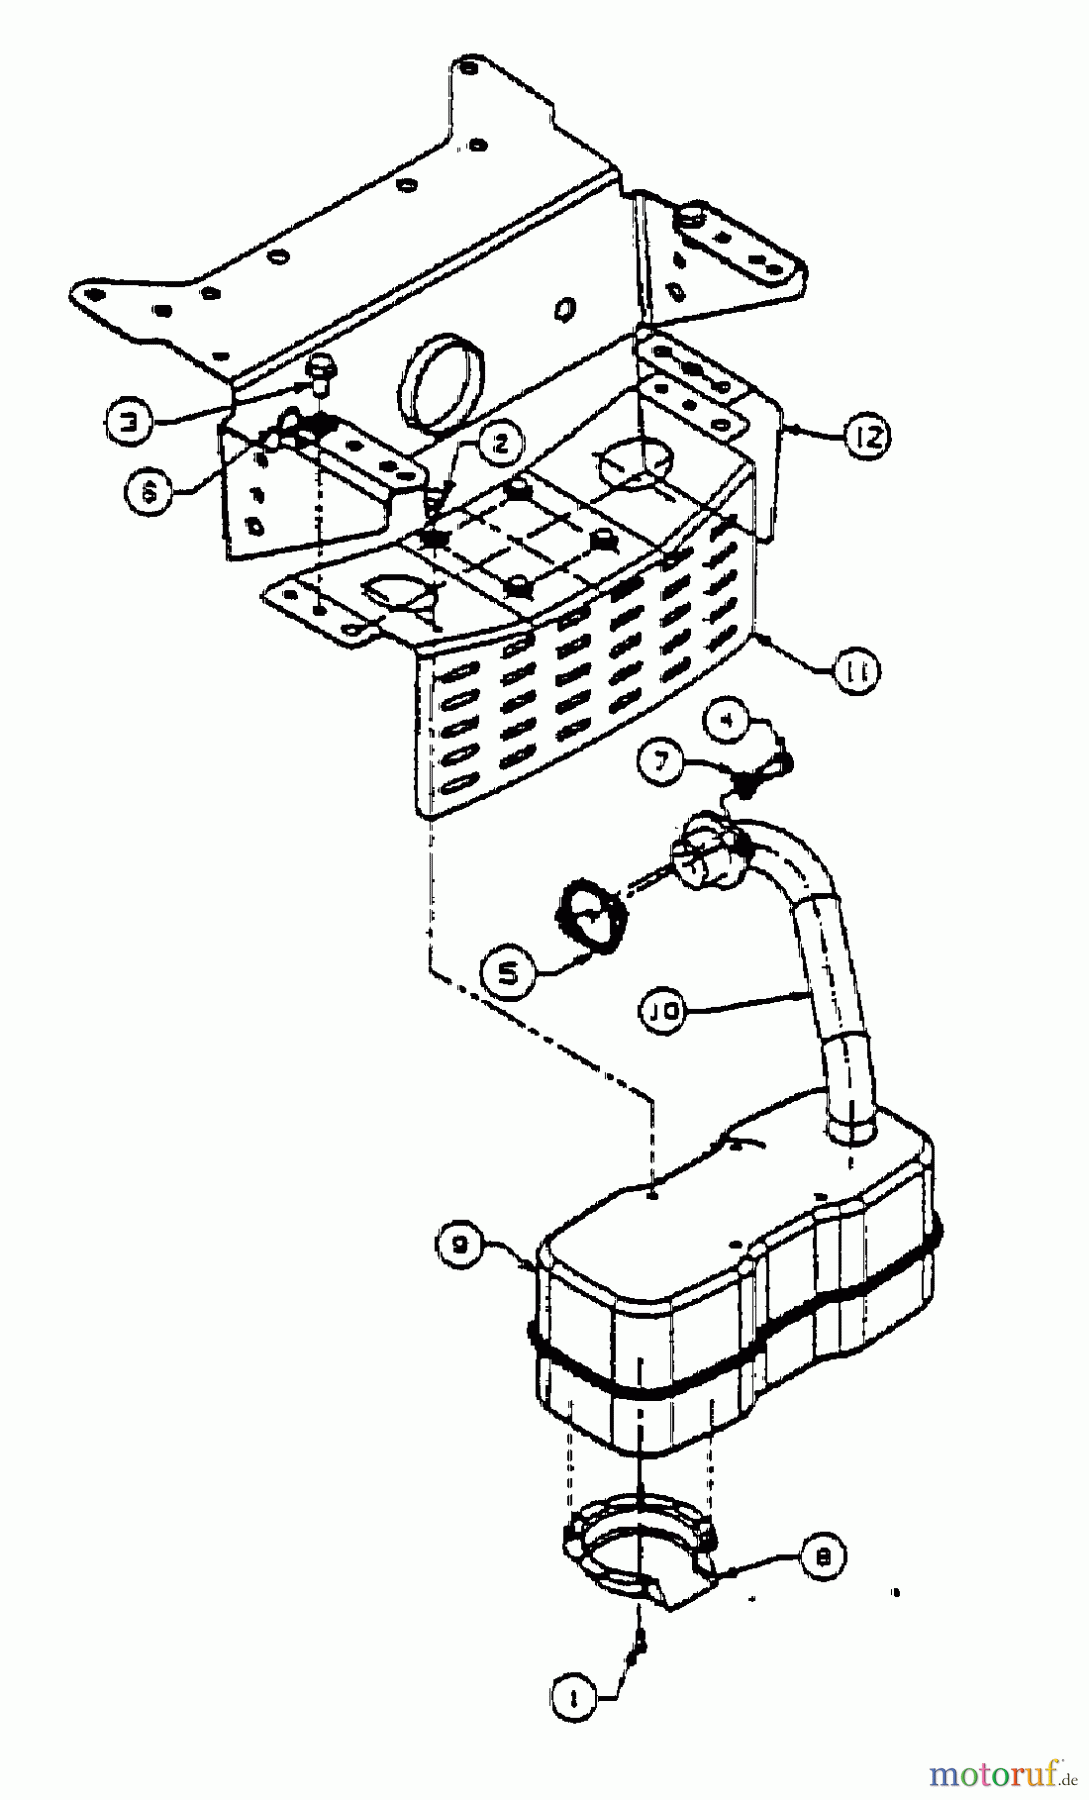  MTD Lawn tractors EH/160 13AT795N678  (1998) Engine accessories